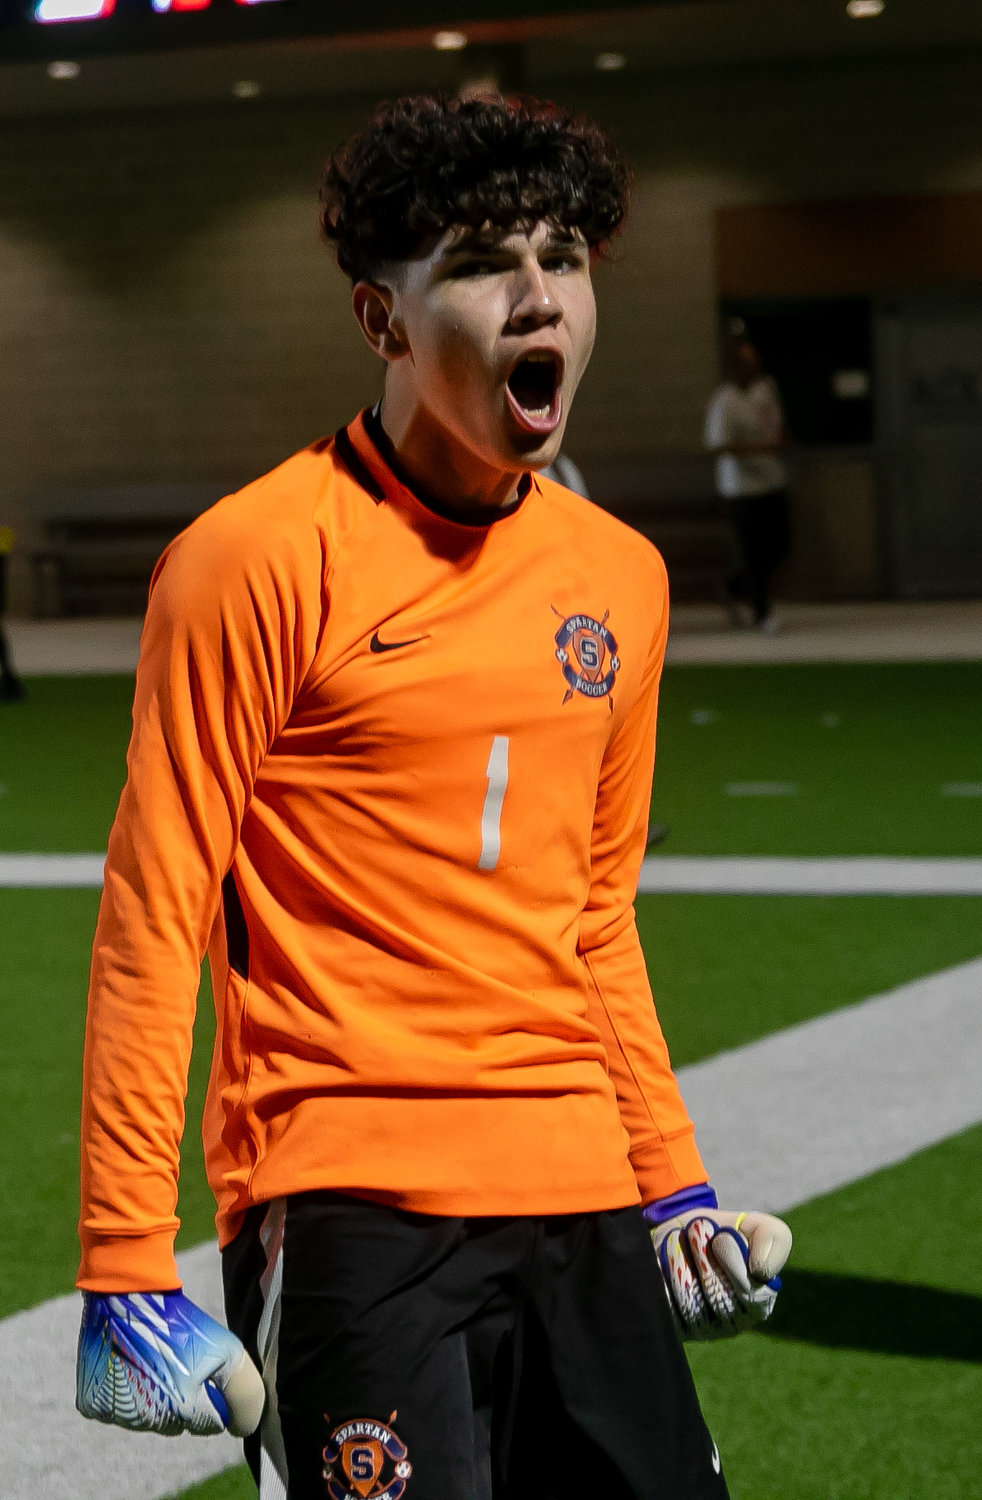 Ben Aviles Vera celebrates after making the game winning penalty kick save during Friday's Class 6A Regional Quarterfinal game between Seven Lakes and Cinco Ranch at Legacy Stadium.